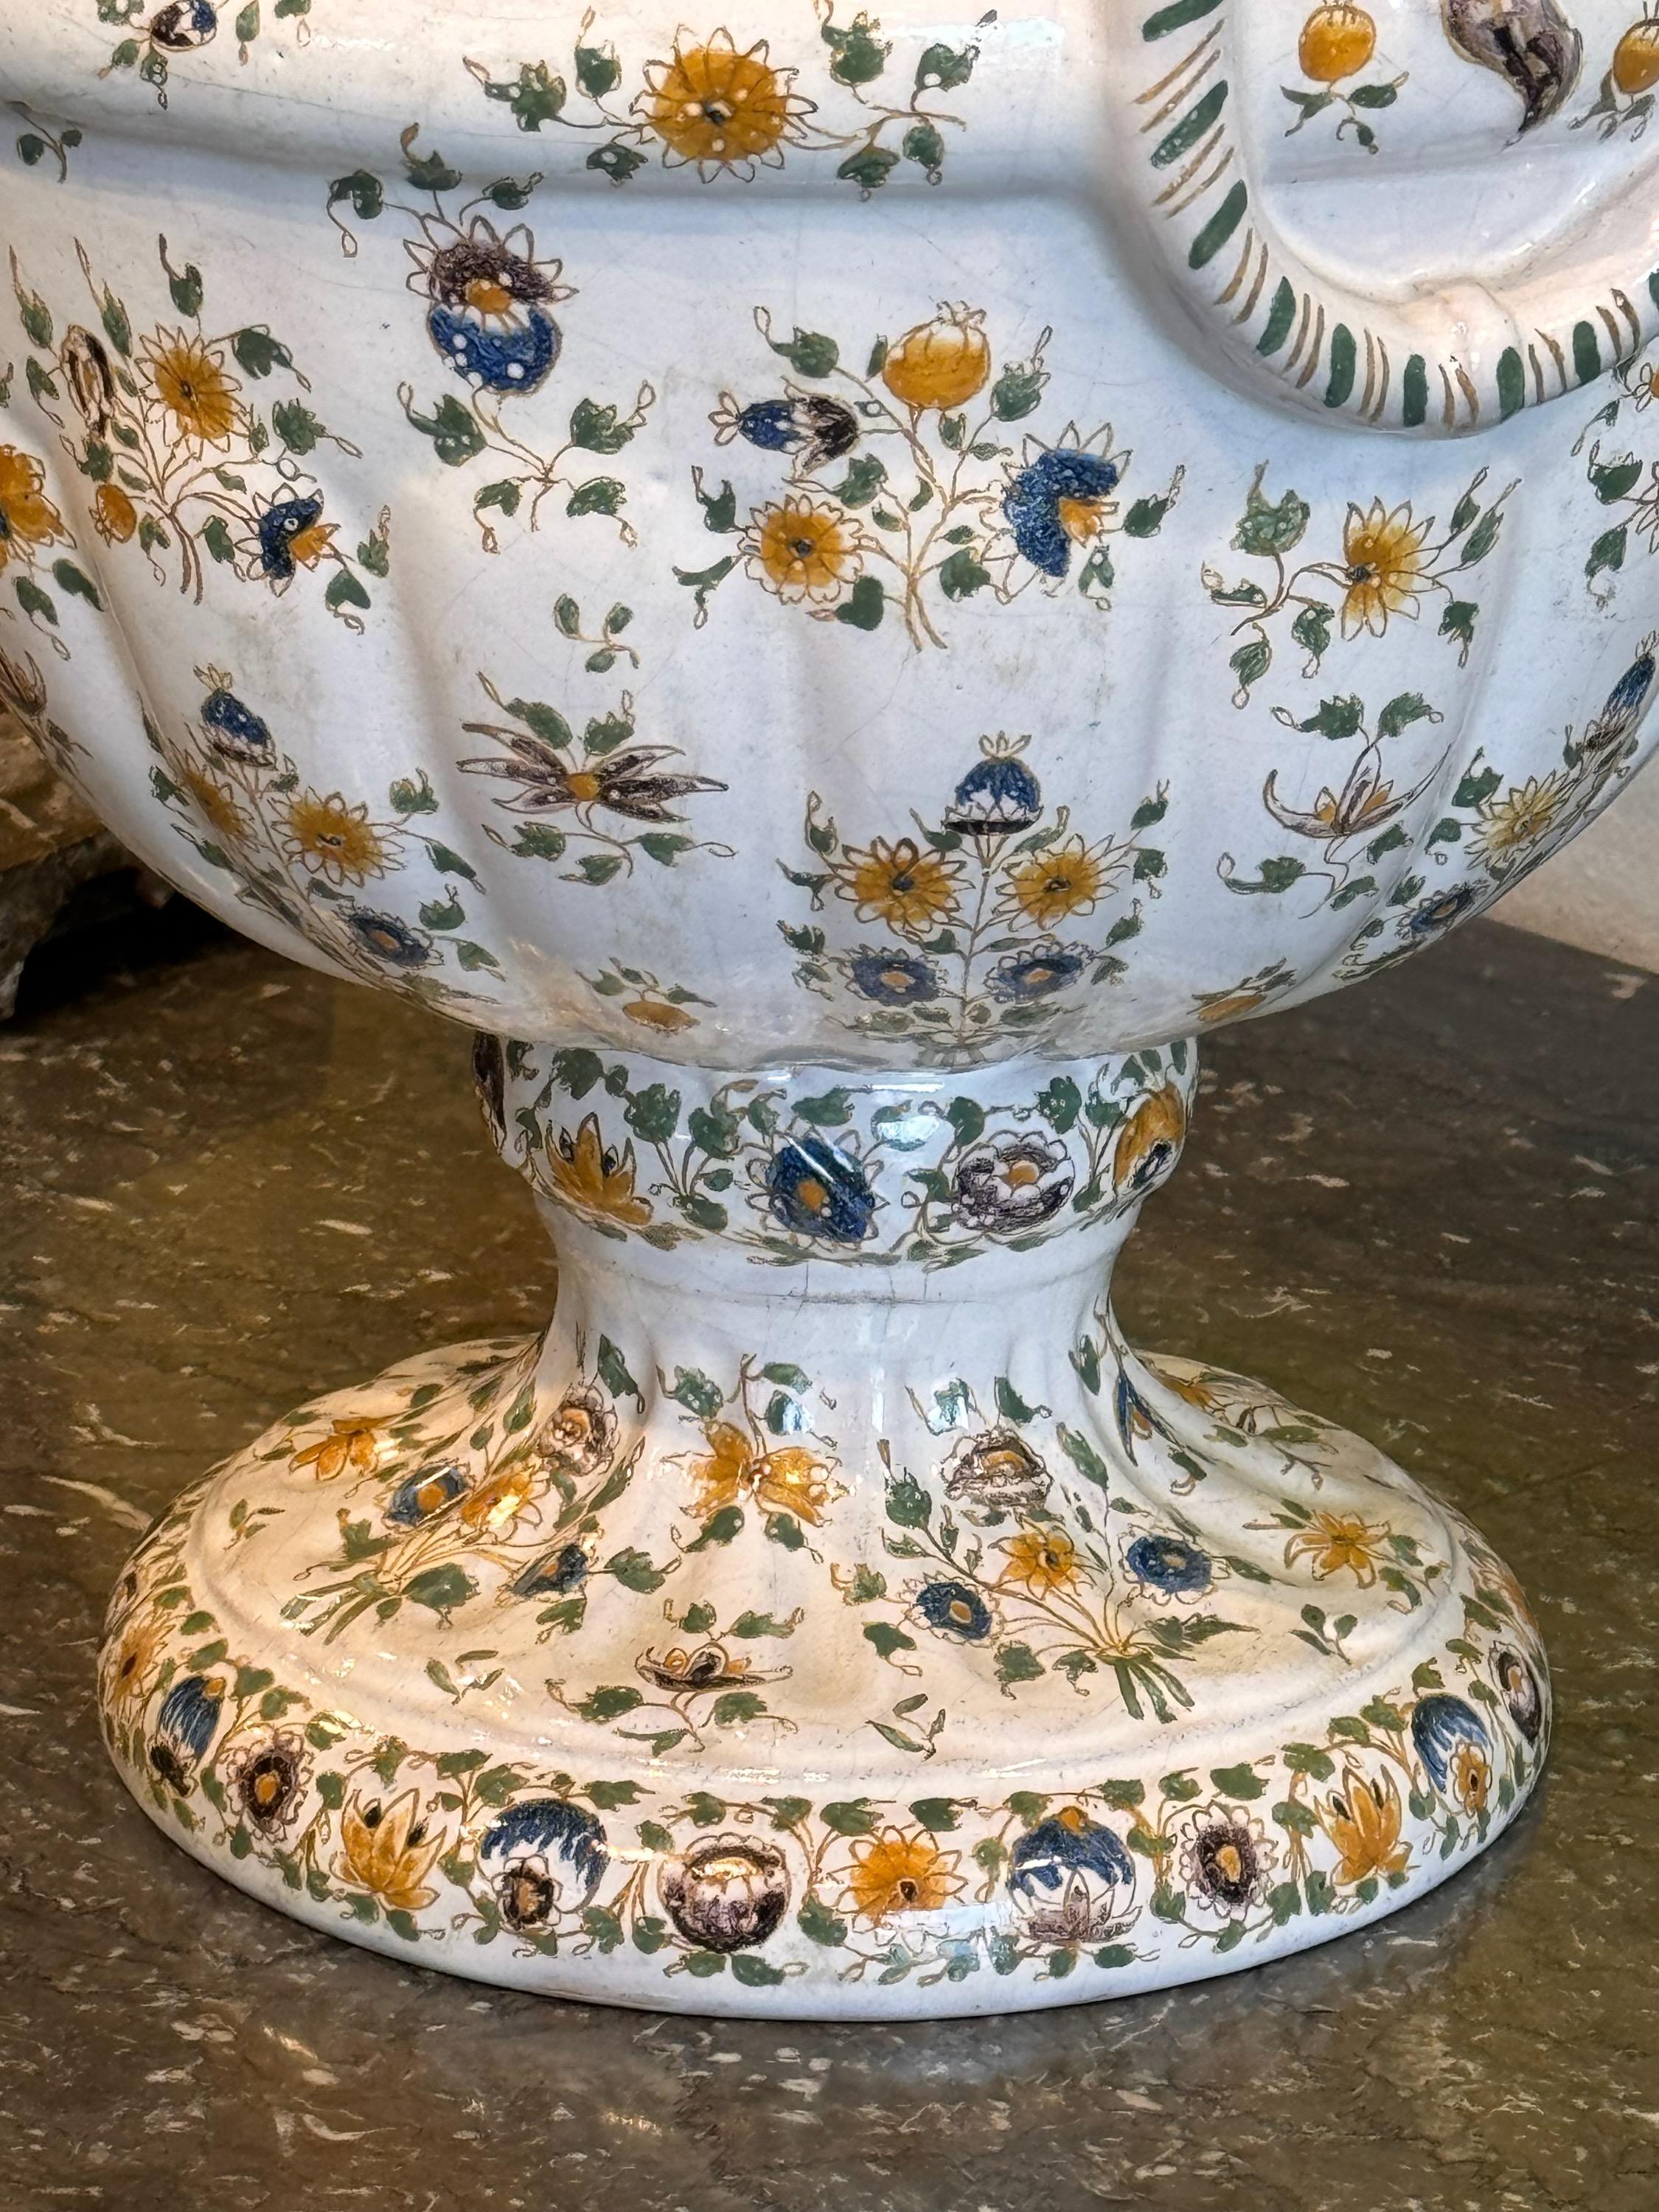 A large scale faience urn with lid. This beautiful piece will add charm and style to anything it sits on.